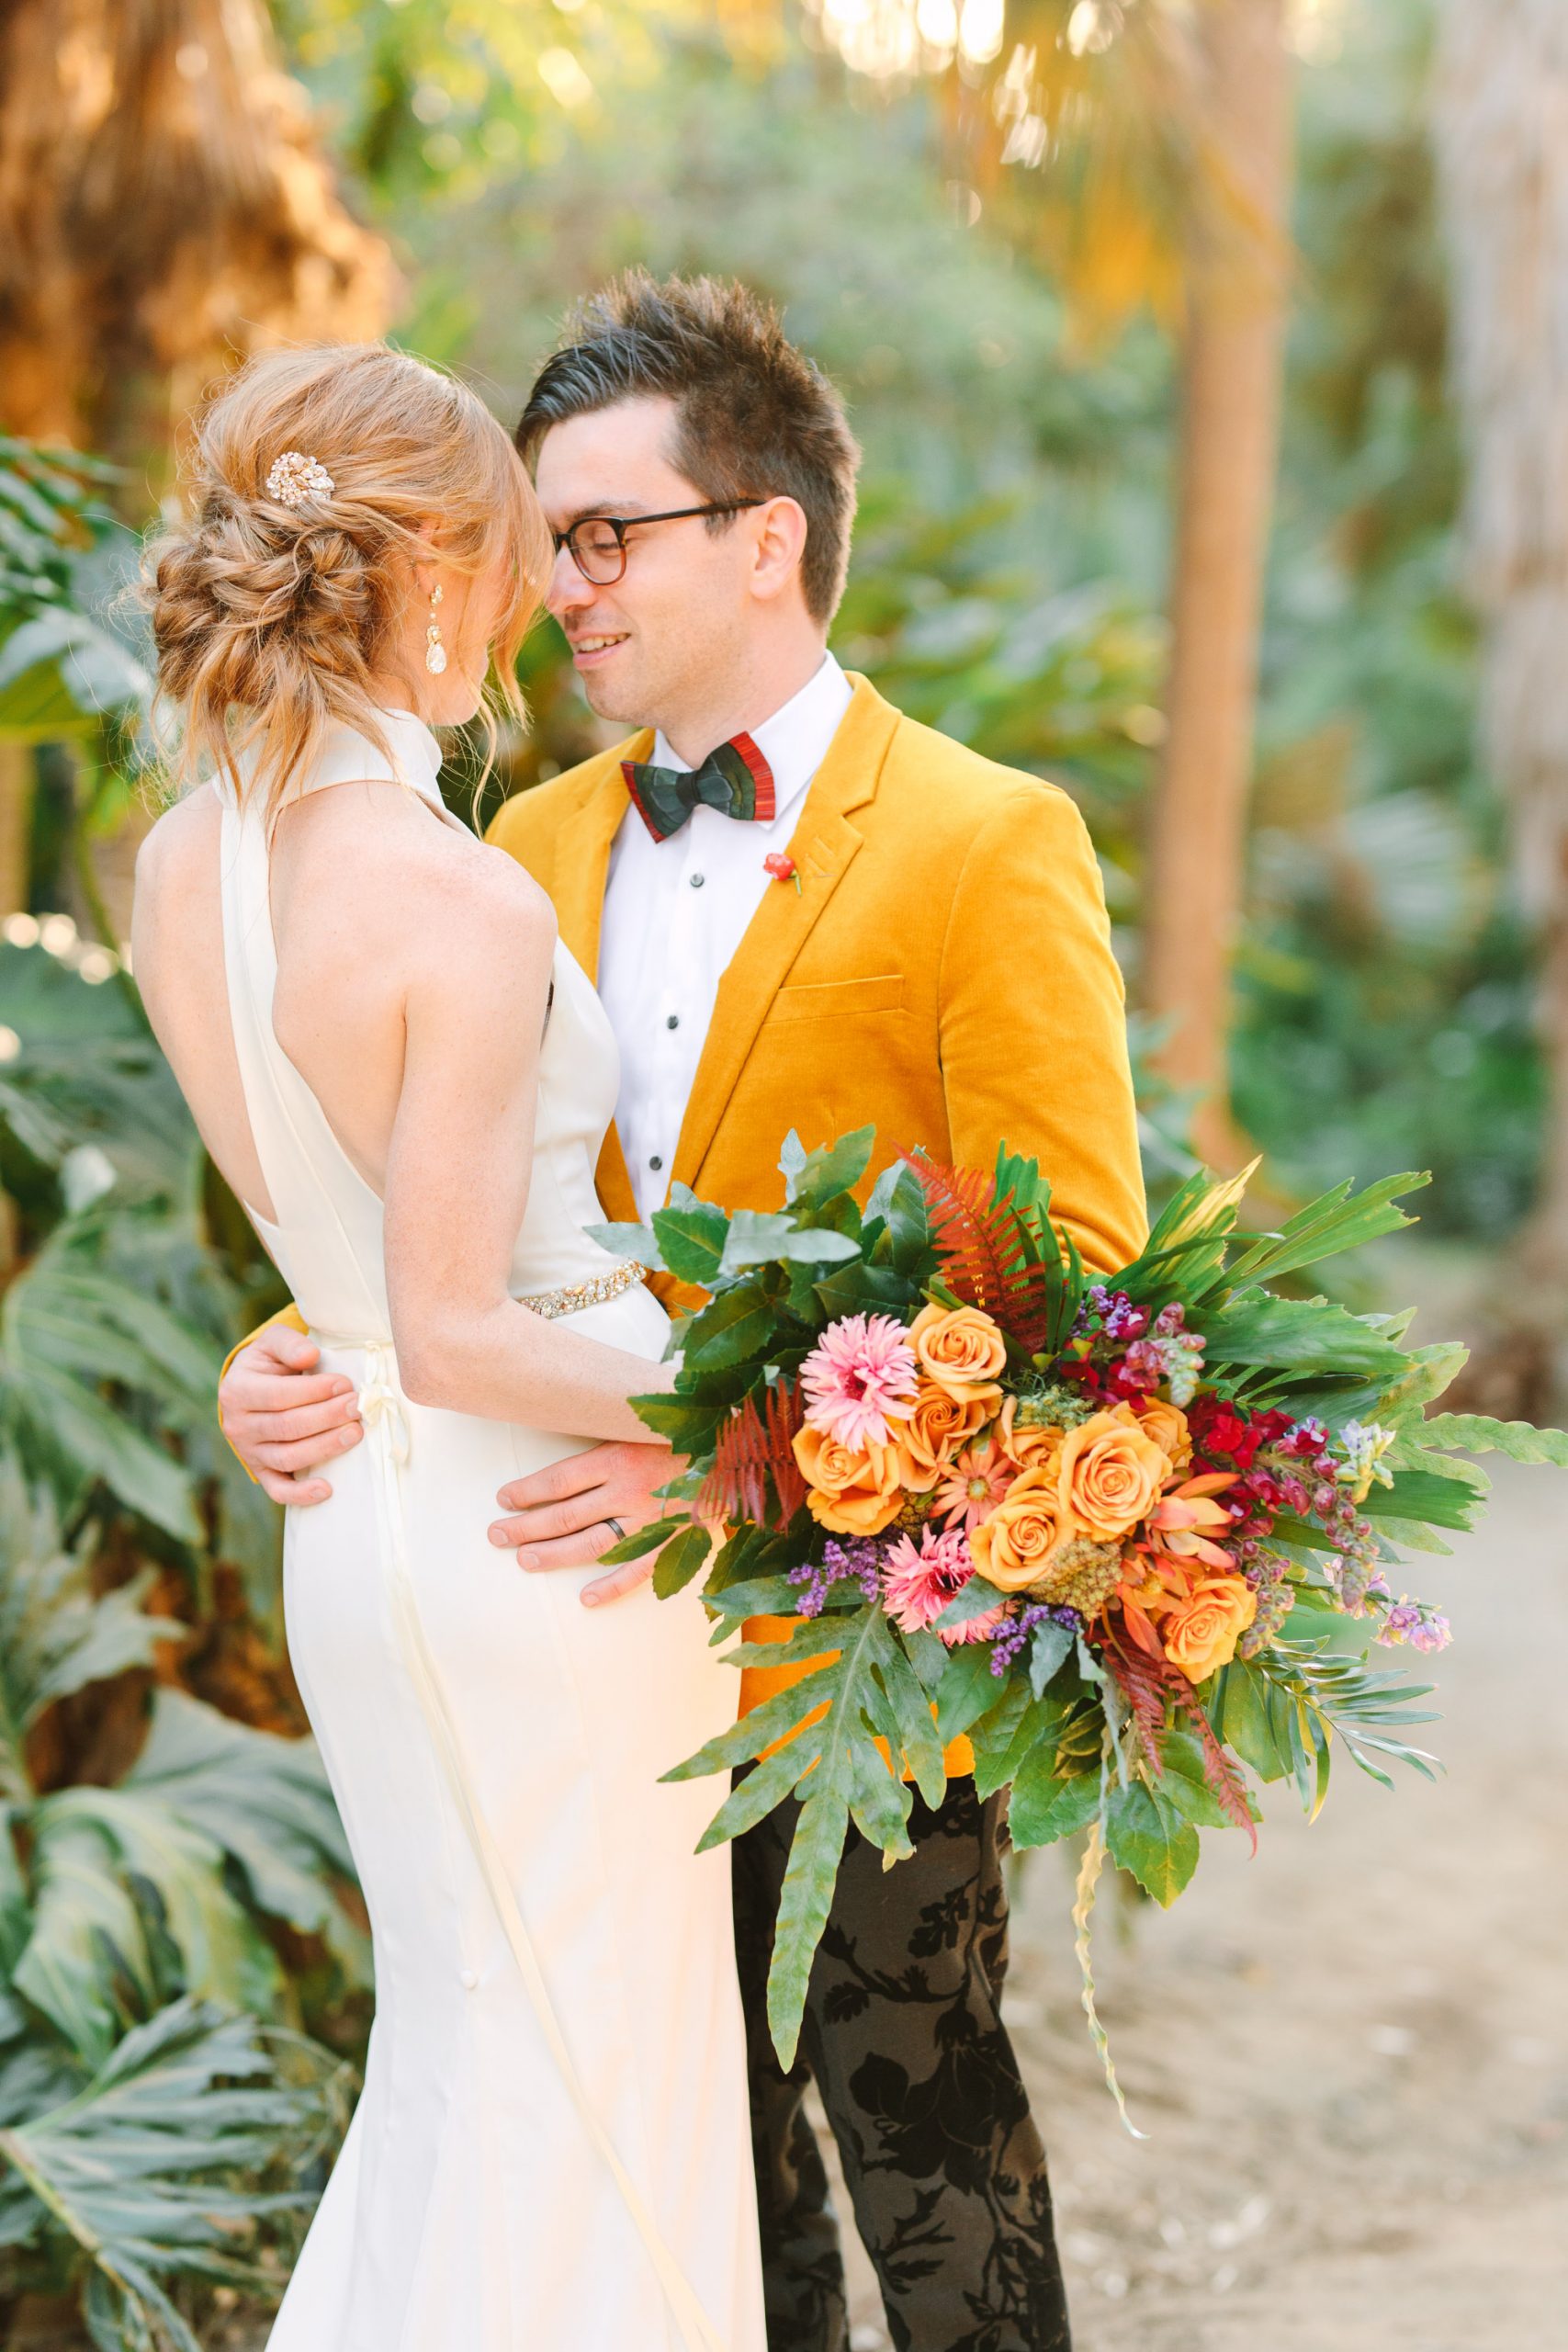 Groom in yellow blazer wedding portrait at Balboa Park in San Diego by Mary Costa Photography